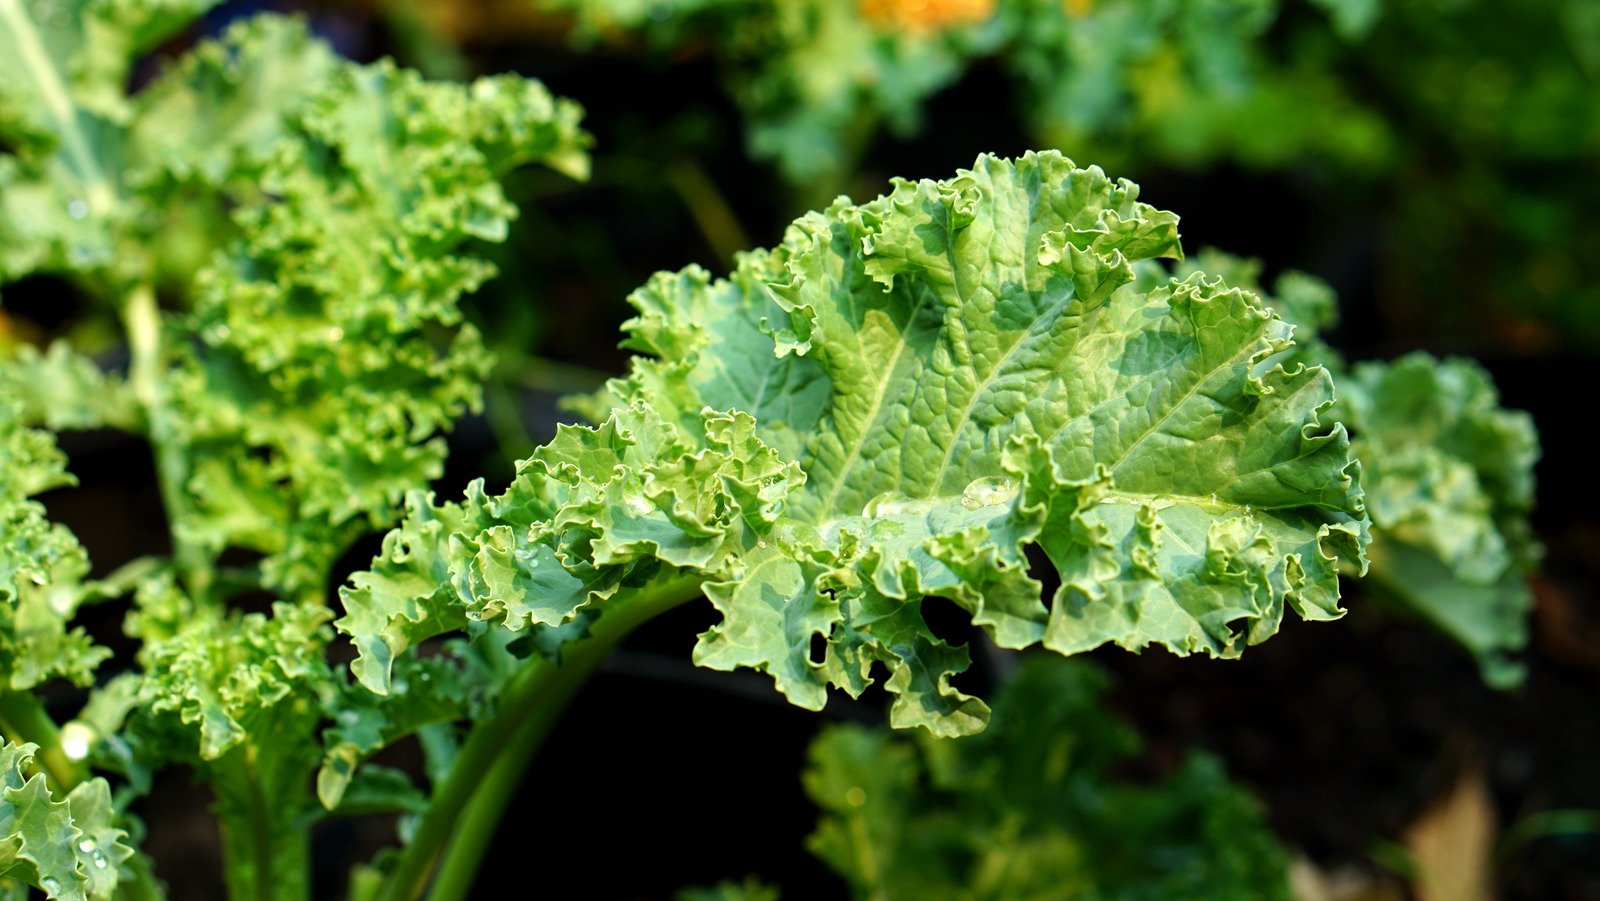 When You Eat Too Much Kale, This Is What Happens To You